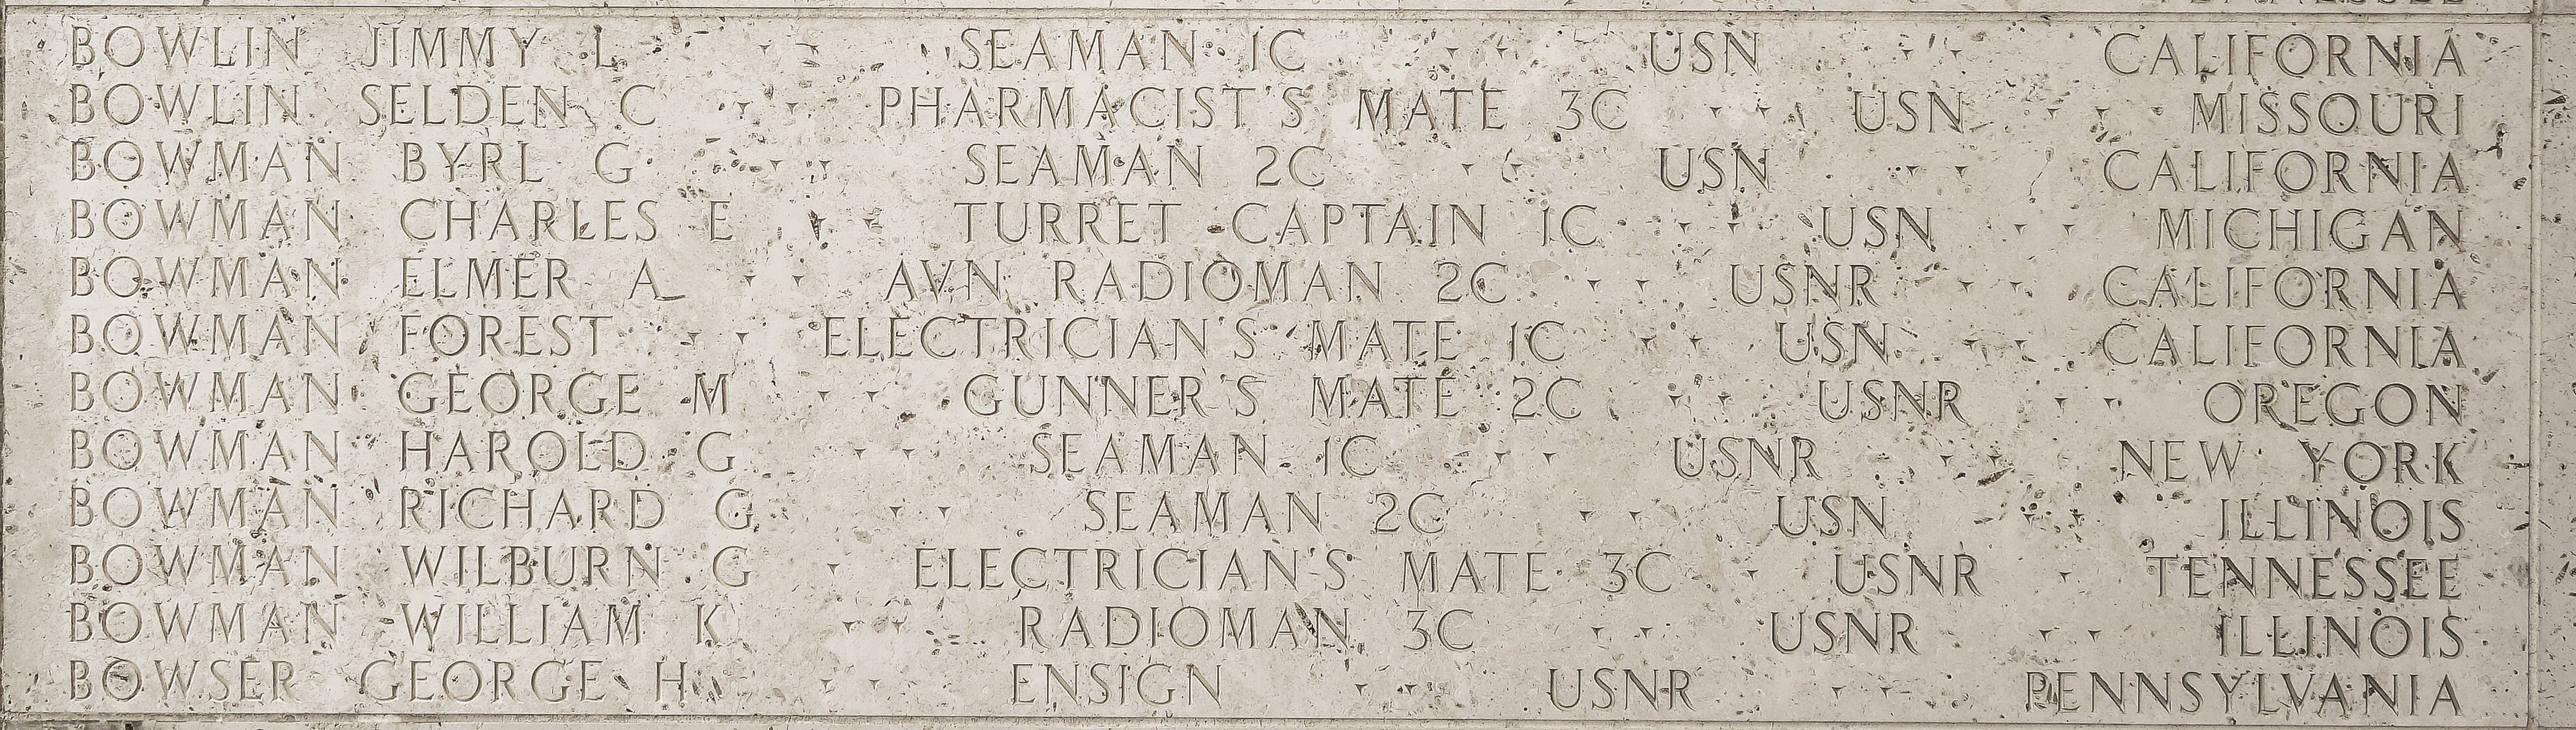 Charles E. Bowman, Turret Captain First Class